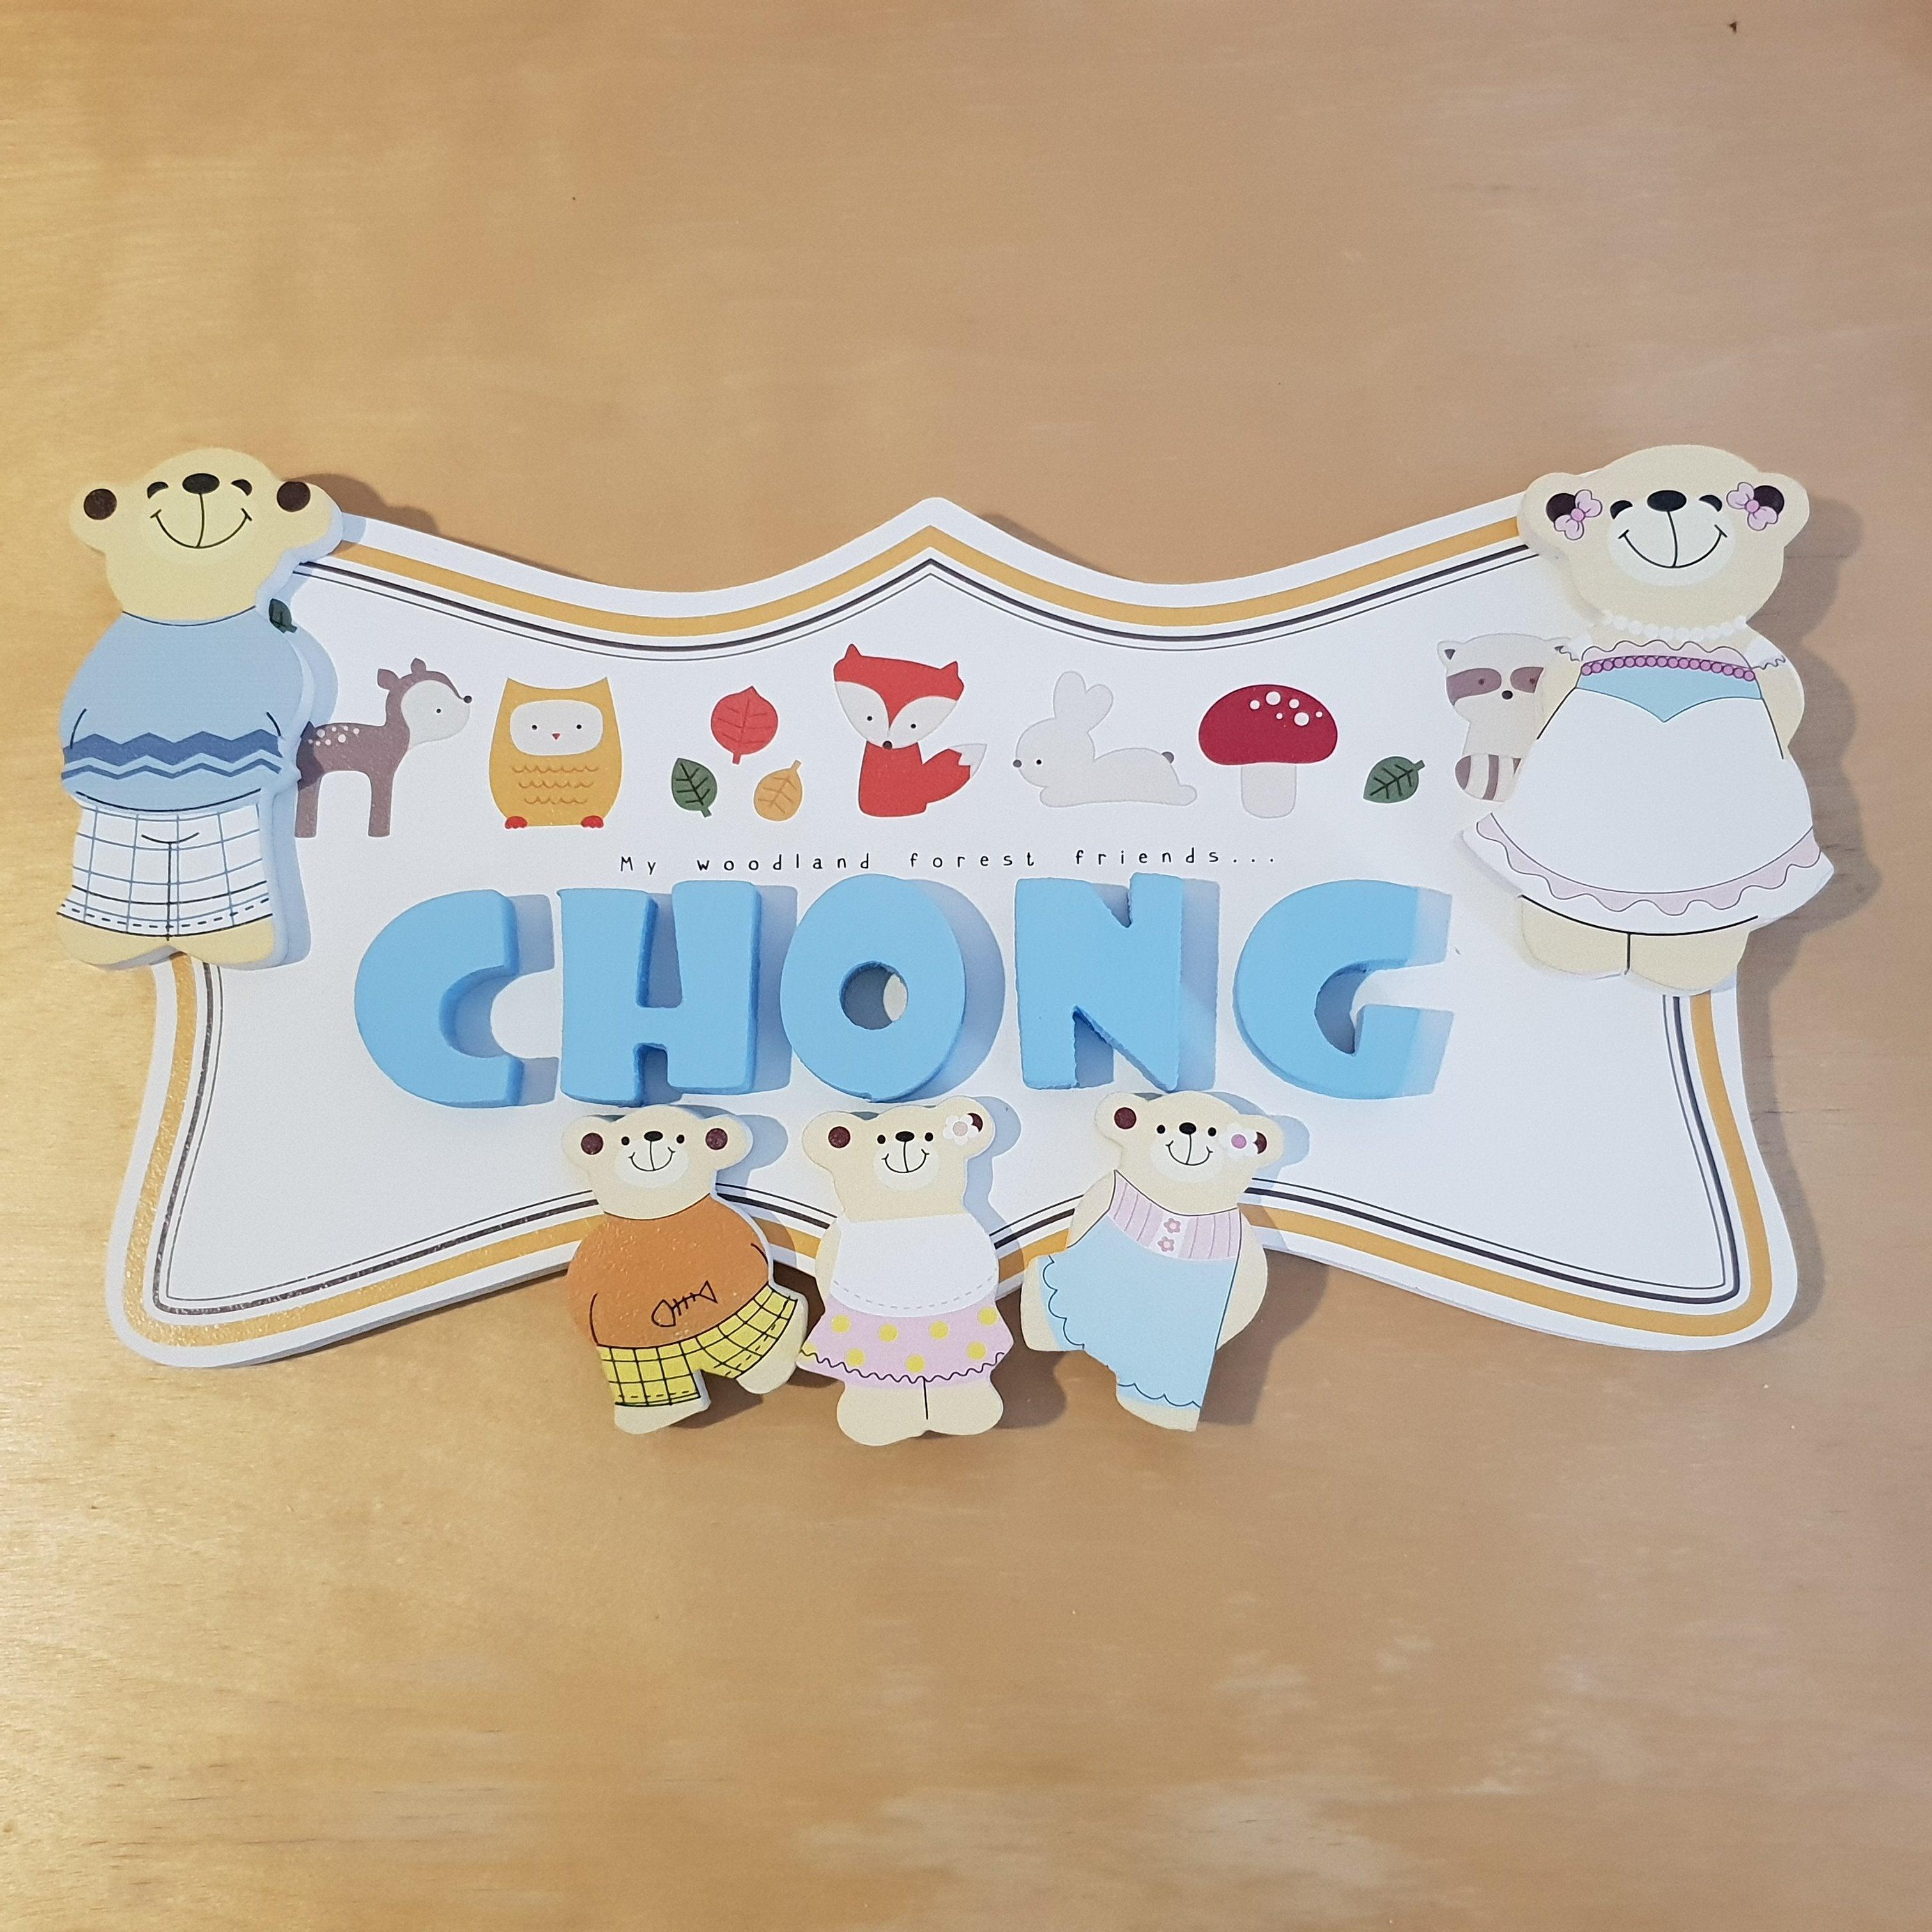 C&F Wooden Forest Friends Ribbon Name Plate - Kids Haven